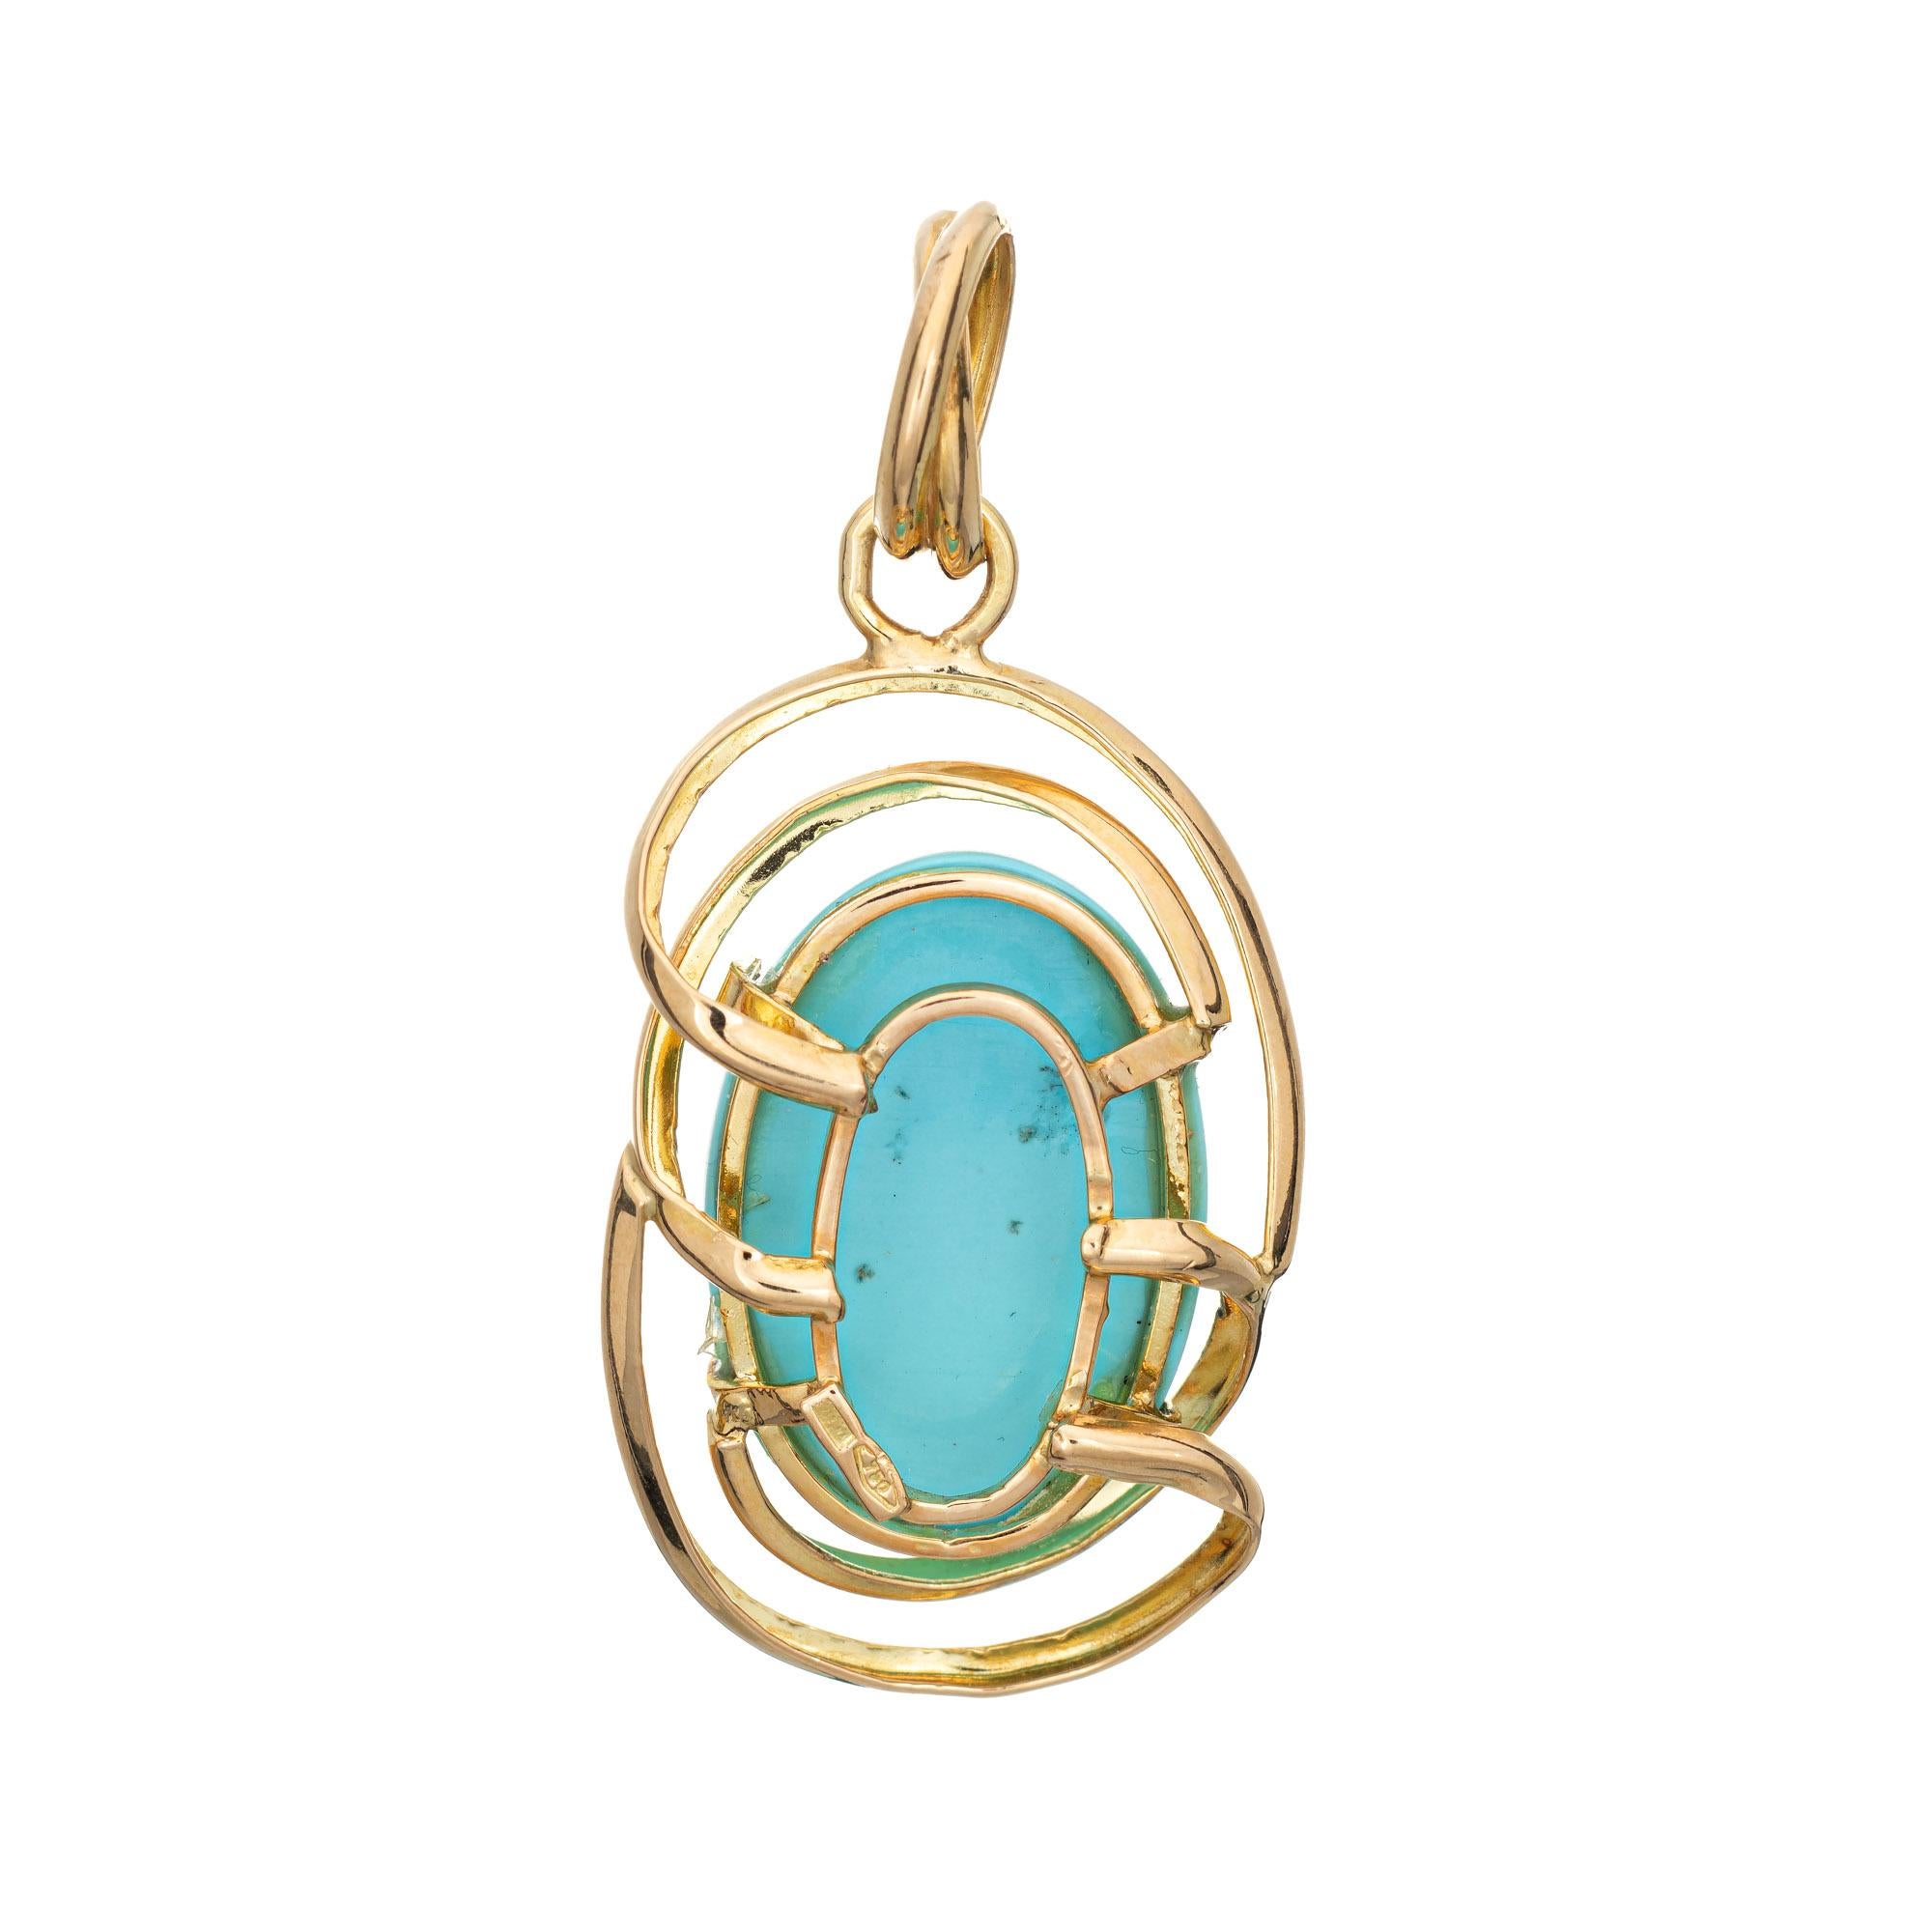 Finely detailed vintage egg shell blue large turquoise pendant crafted in 18 karat yellow gold (circa 1960s to 1970s). 

Cabochon cut turquoise measures 24mm x 16.5mm (estimated at 25 carats). The turquoise is in excellent condition and free of